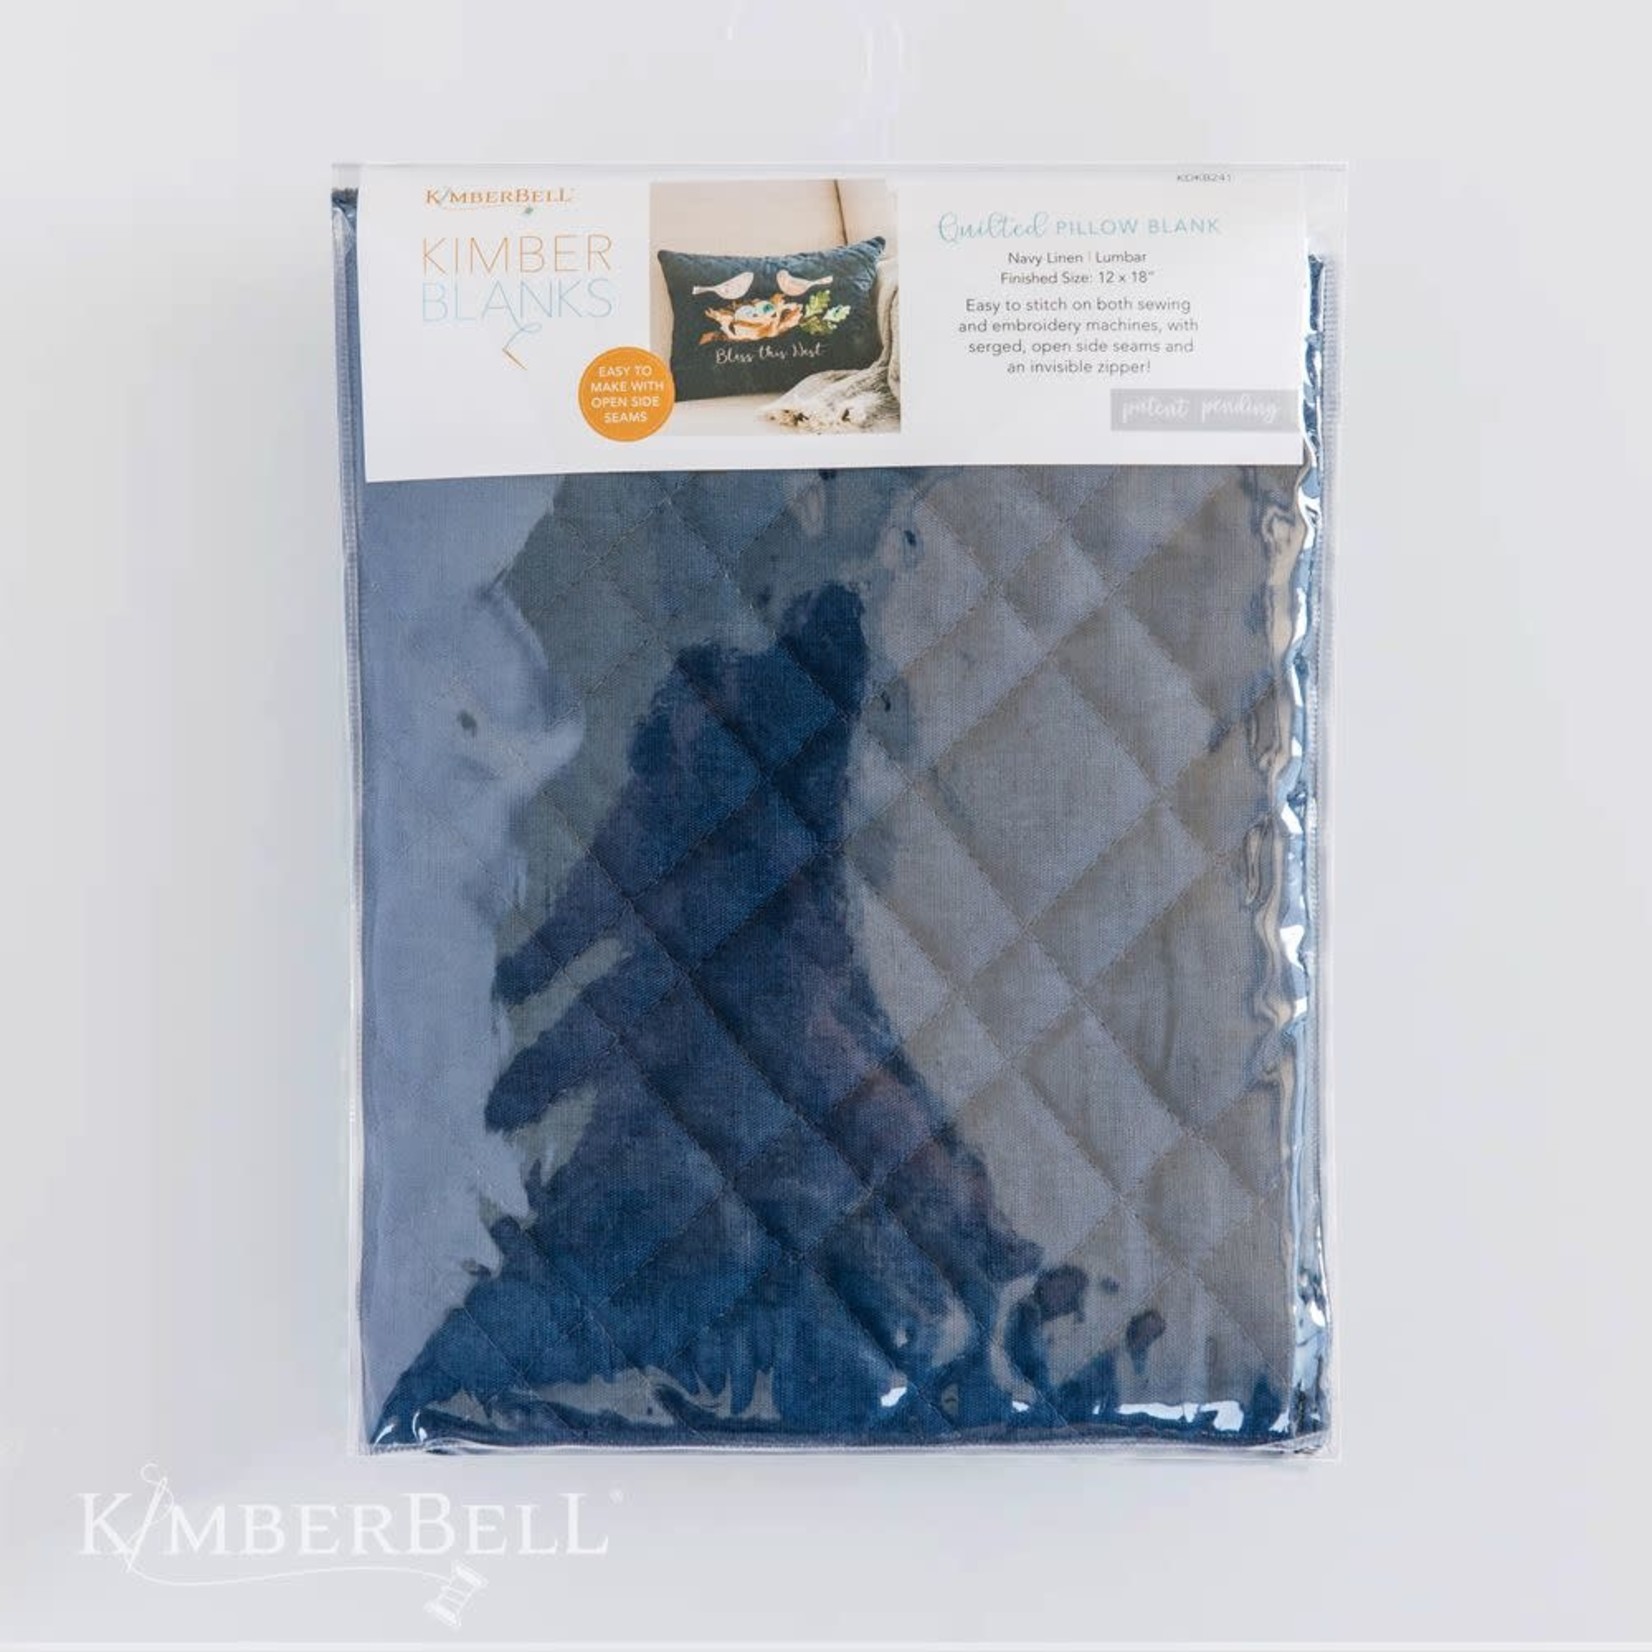 Kimberbell Designs Quilted Pillow Blank, 13"x19" Navy Linen, Plaid Quilting